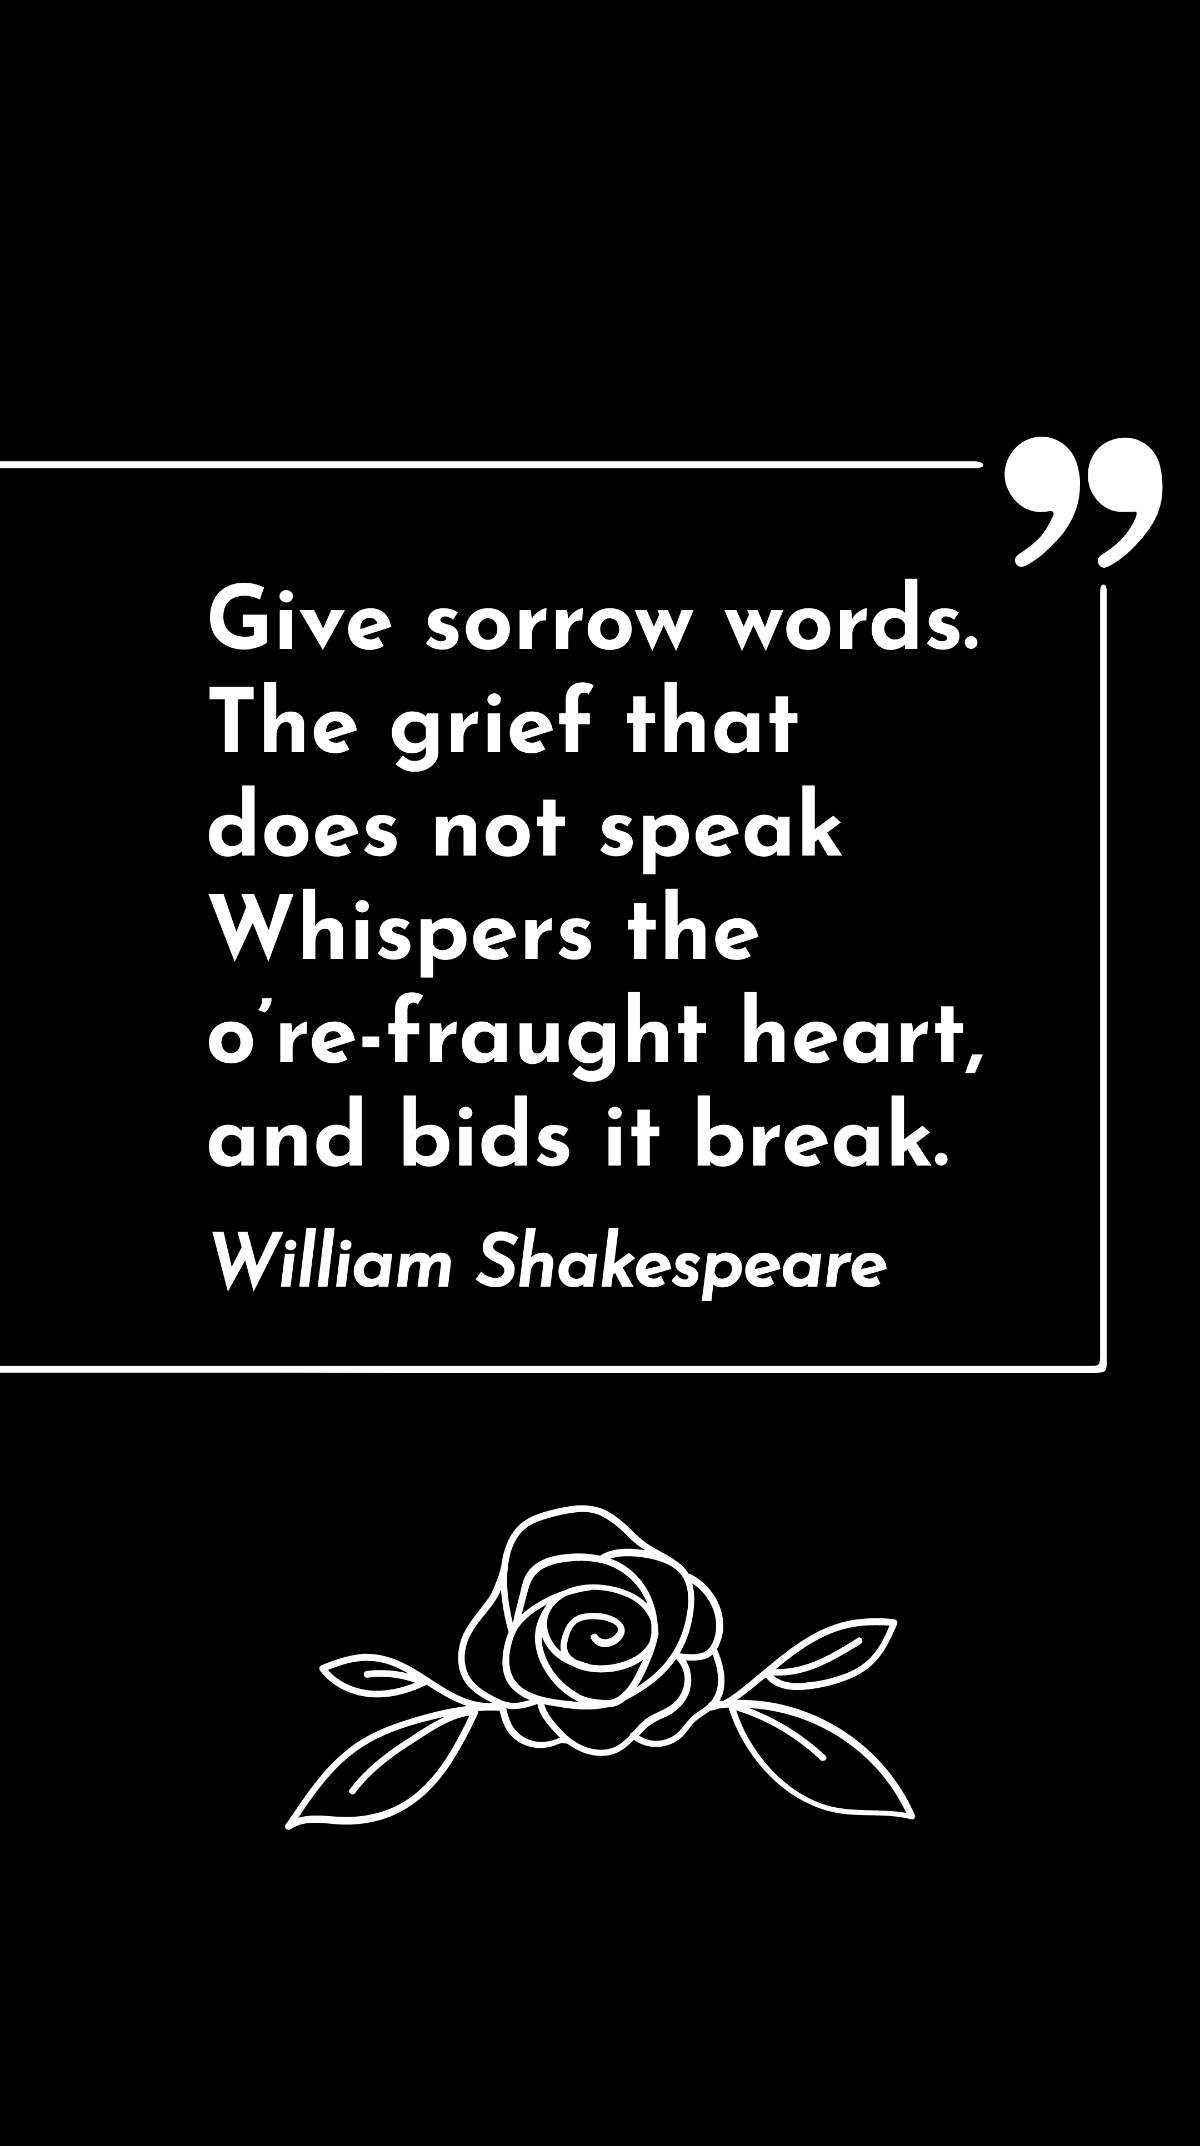 William Shakespeare - Give sorrow words. The grief that does not speak Whispers the o’re-fraught heart, and bids it break. Template